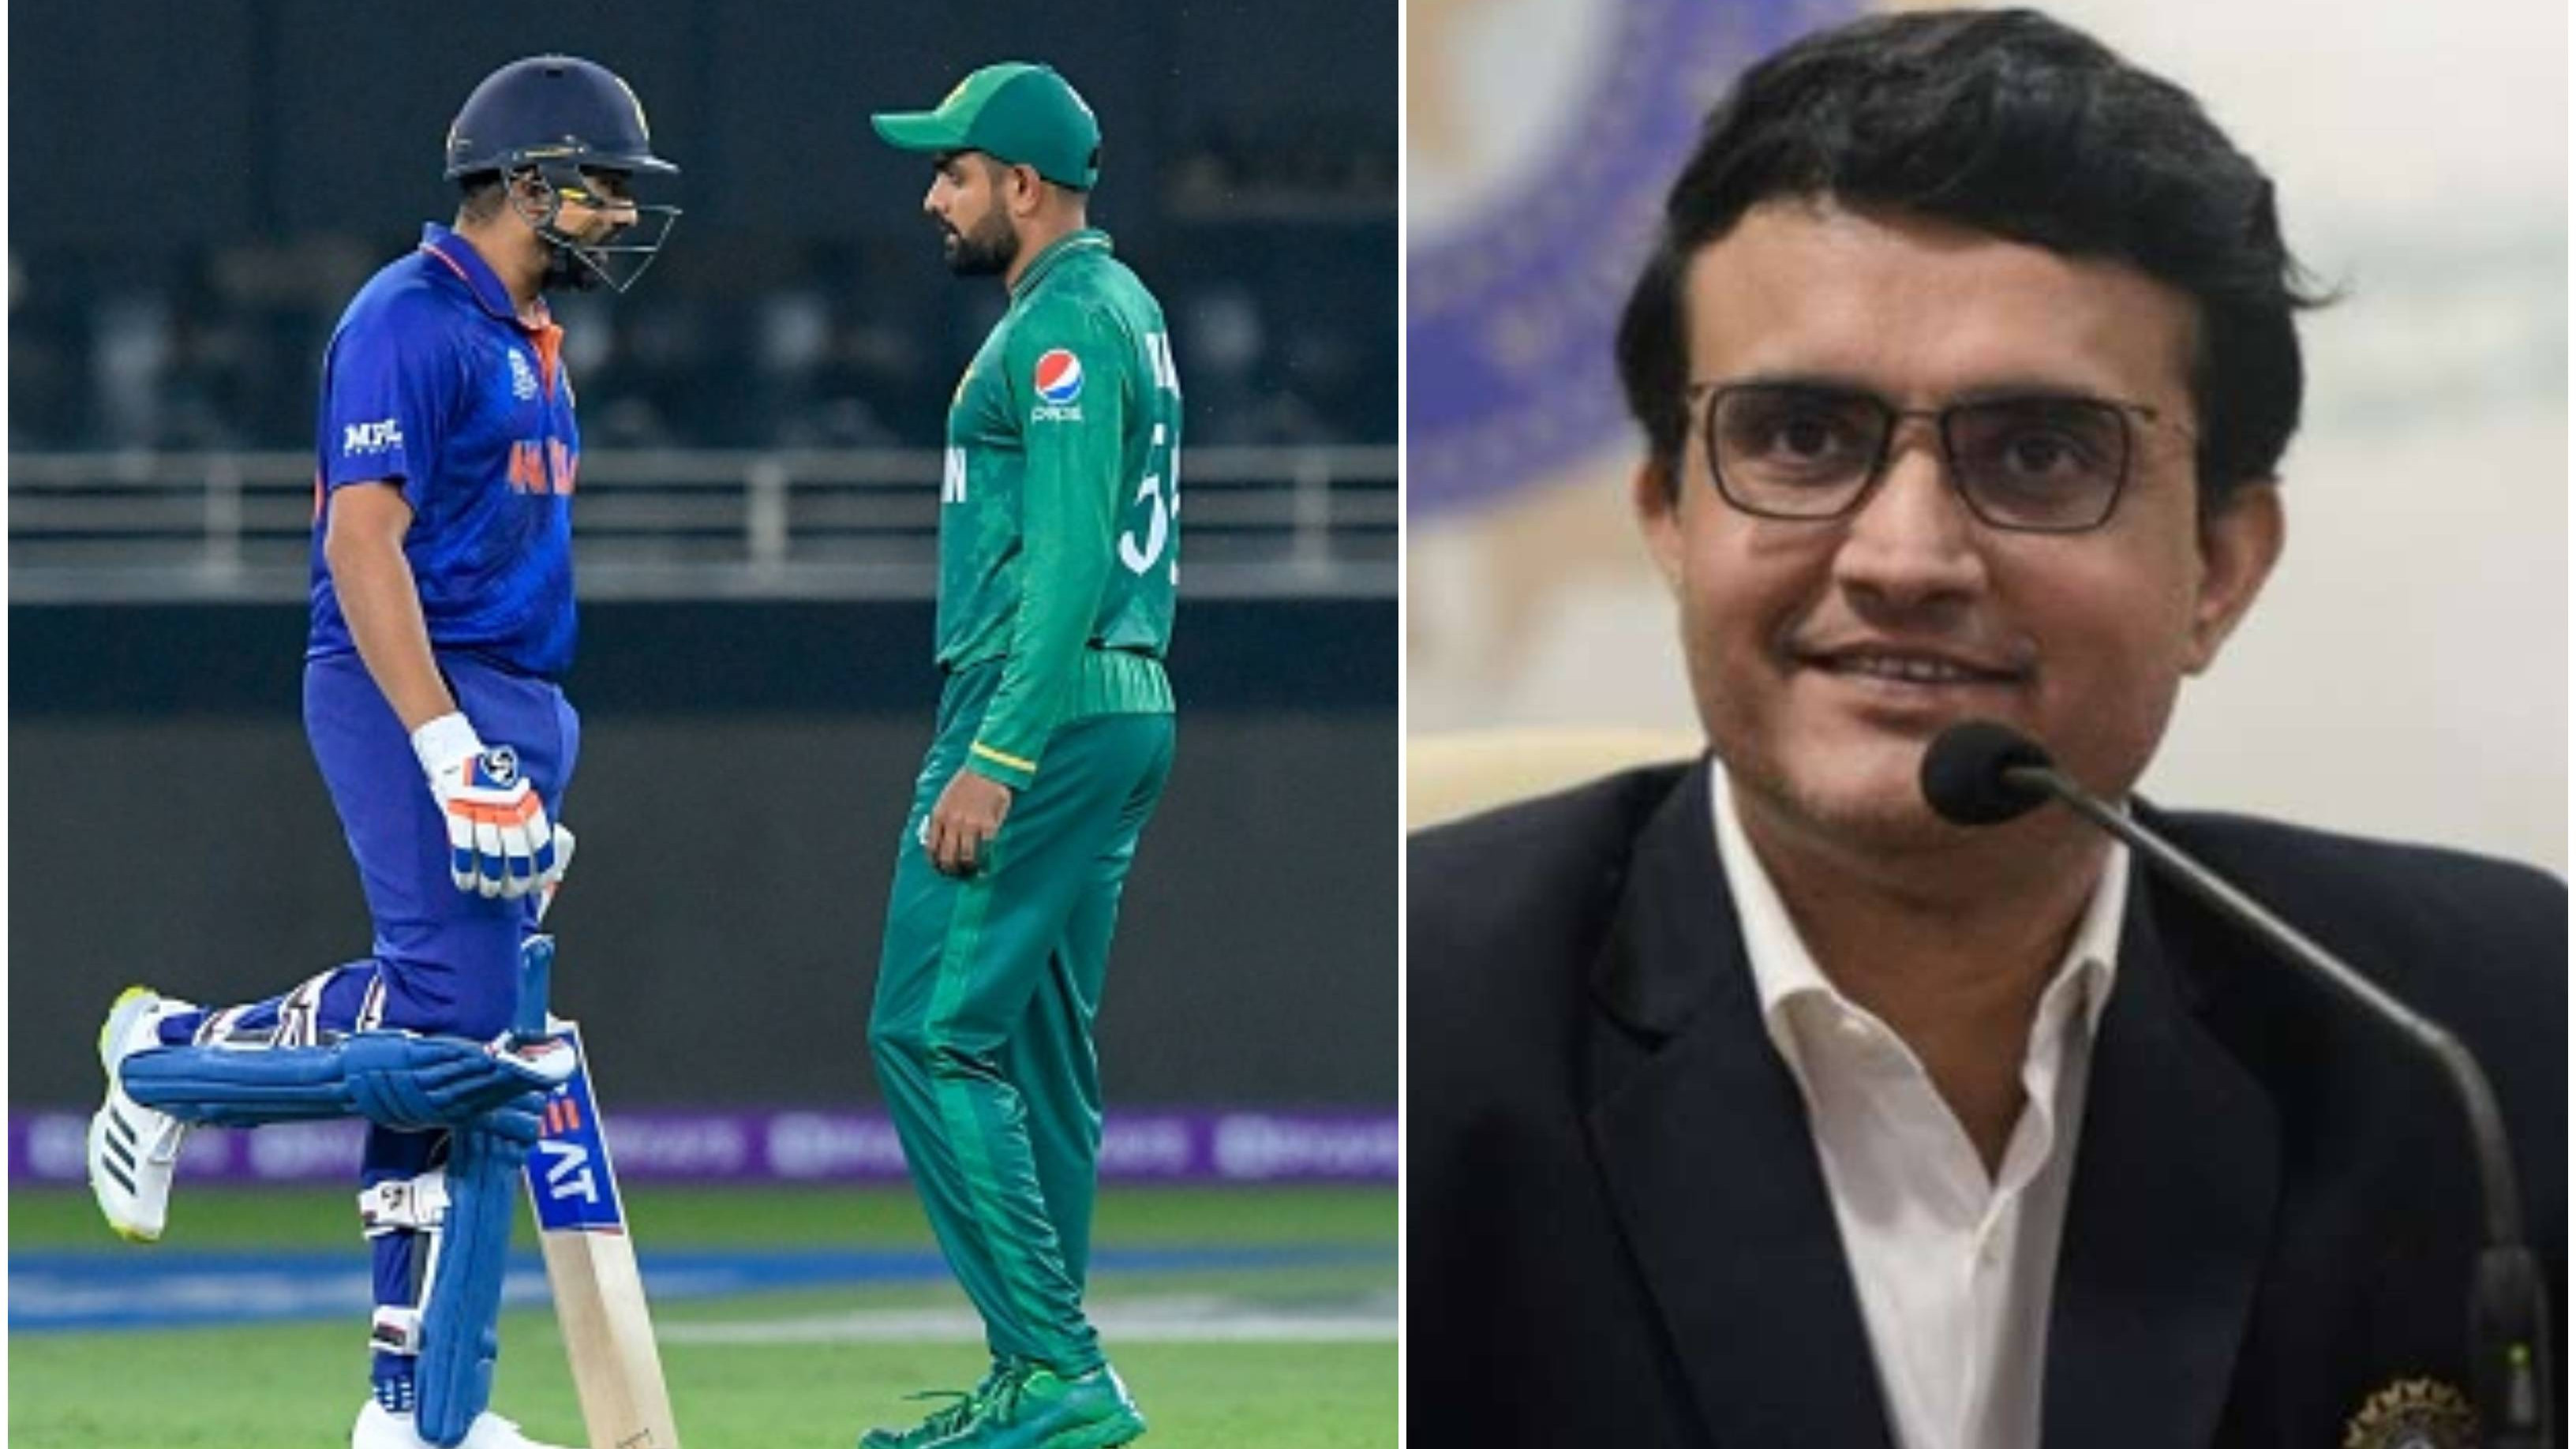 Asia Cup 2022: “Just another match for me”, Ganguly doesn’t see Asia Cup as India vs Pakistan clash